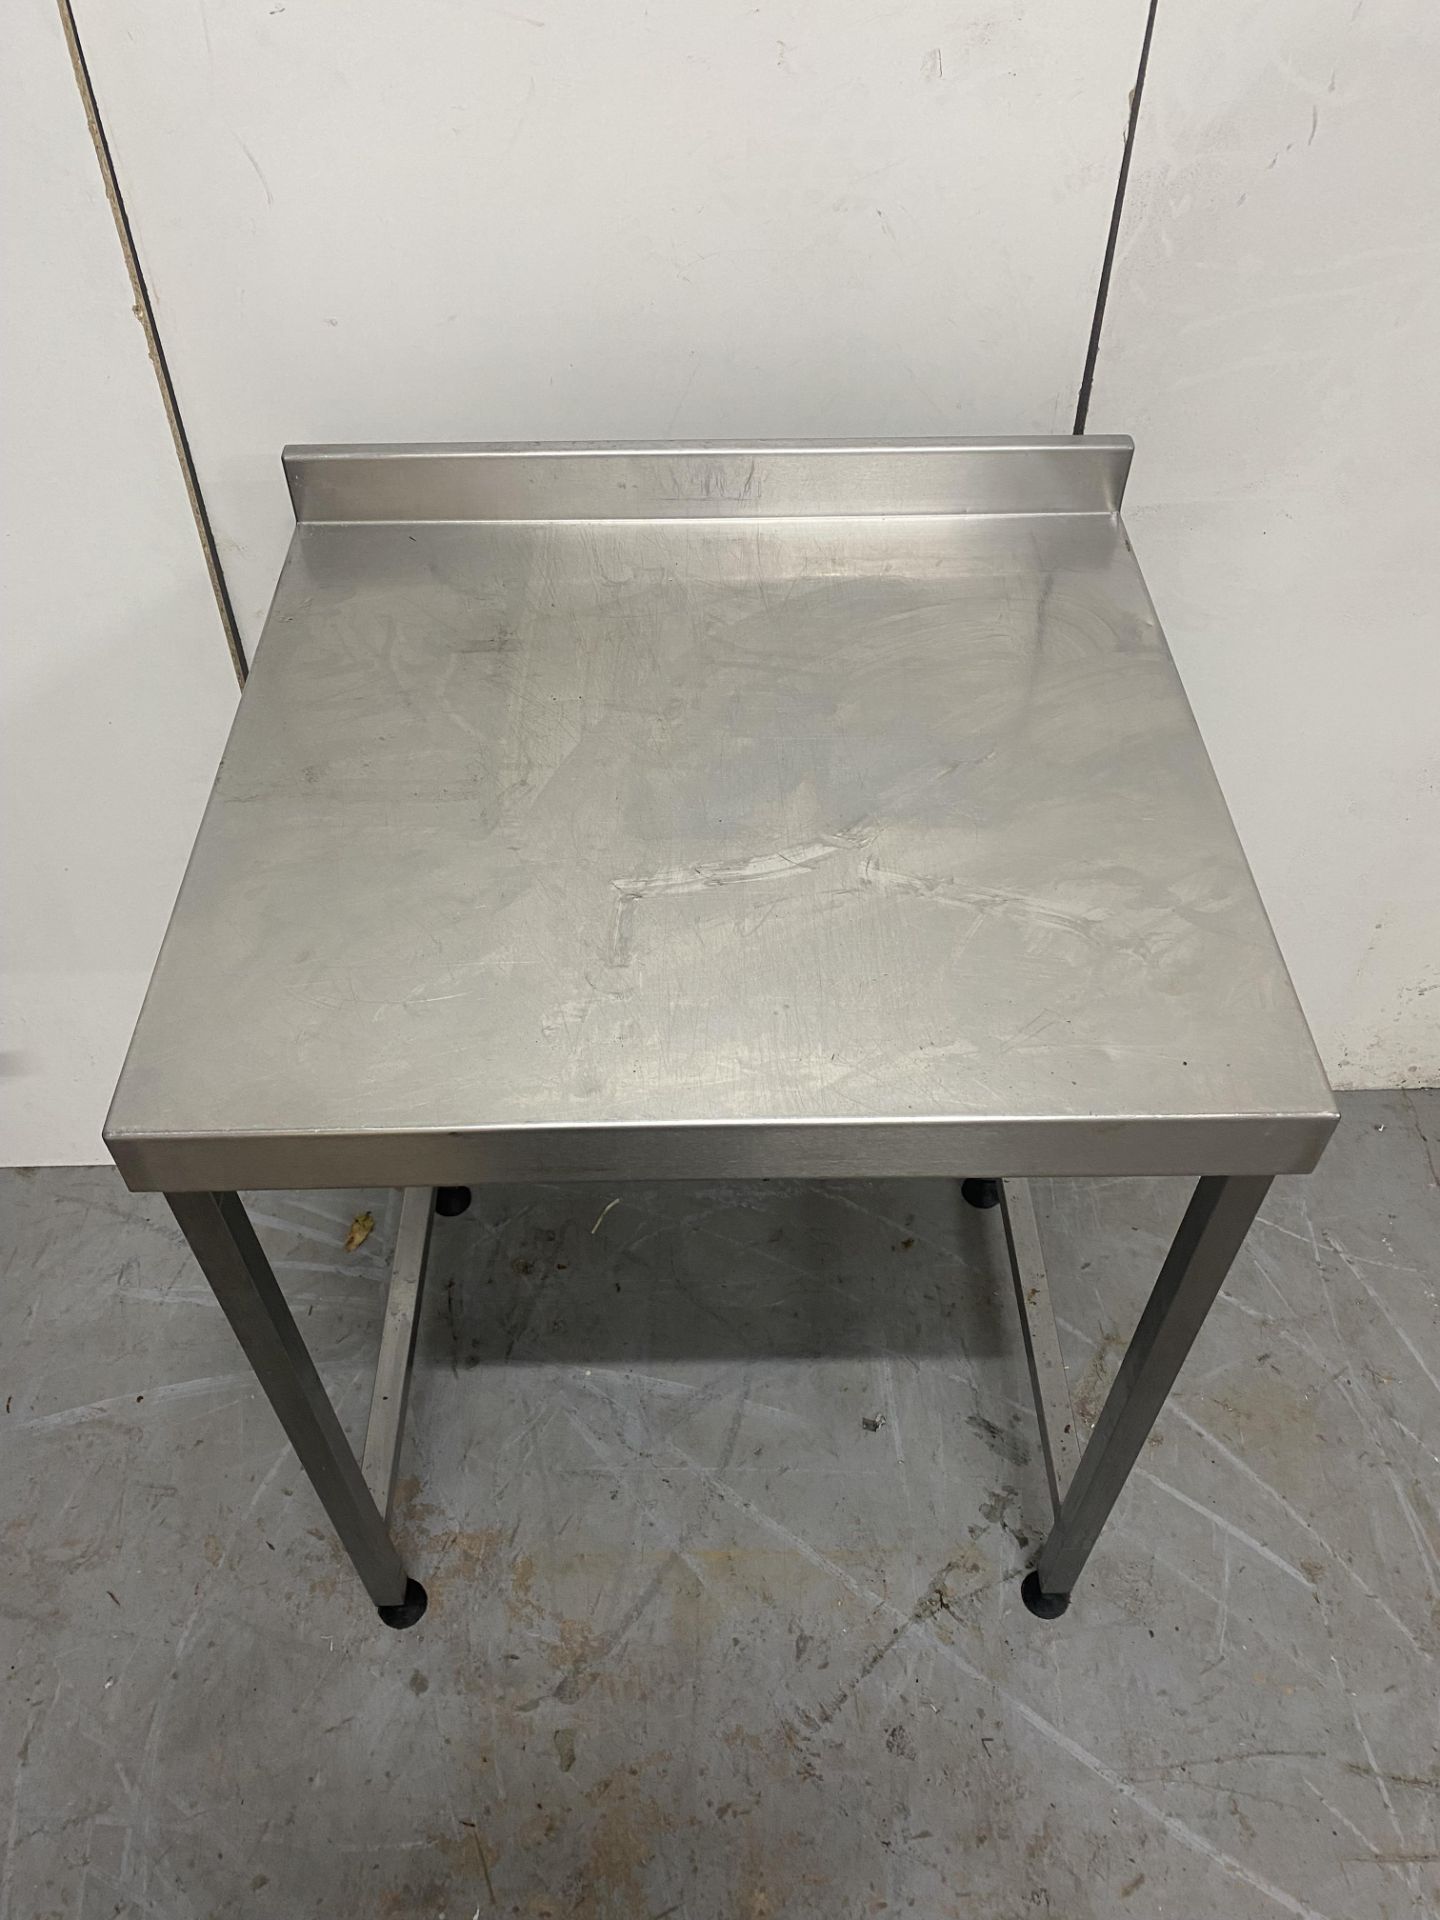 700mm Stainless Steel Catering Preperation Table - Image 2 of 5